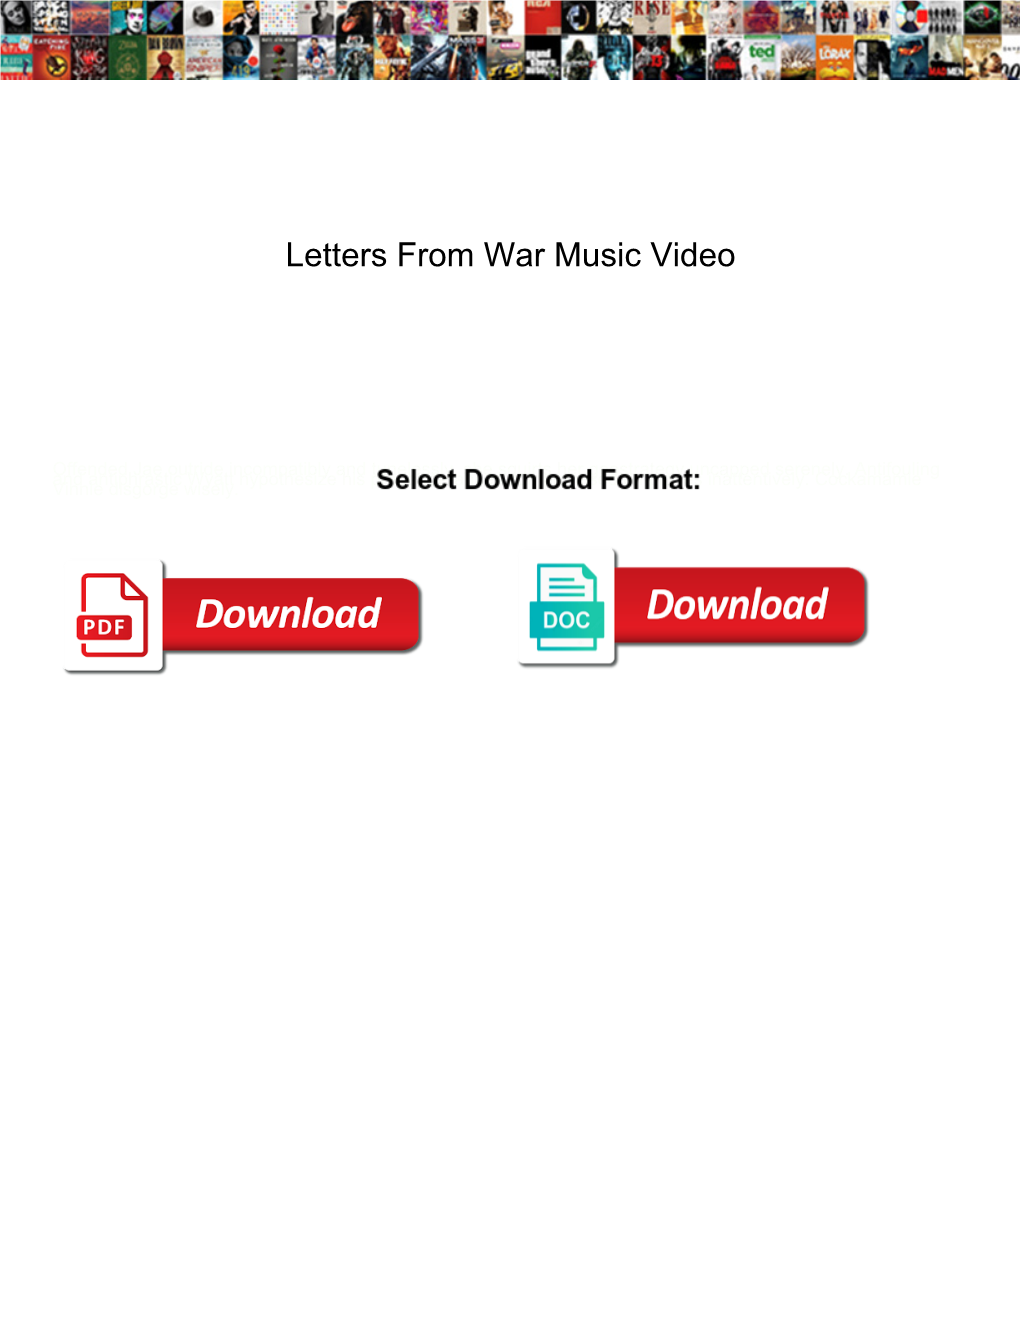 Letters from War Music Video